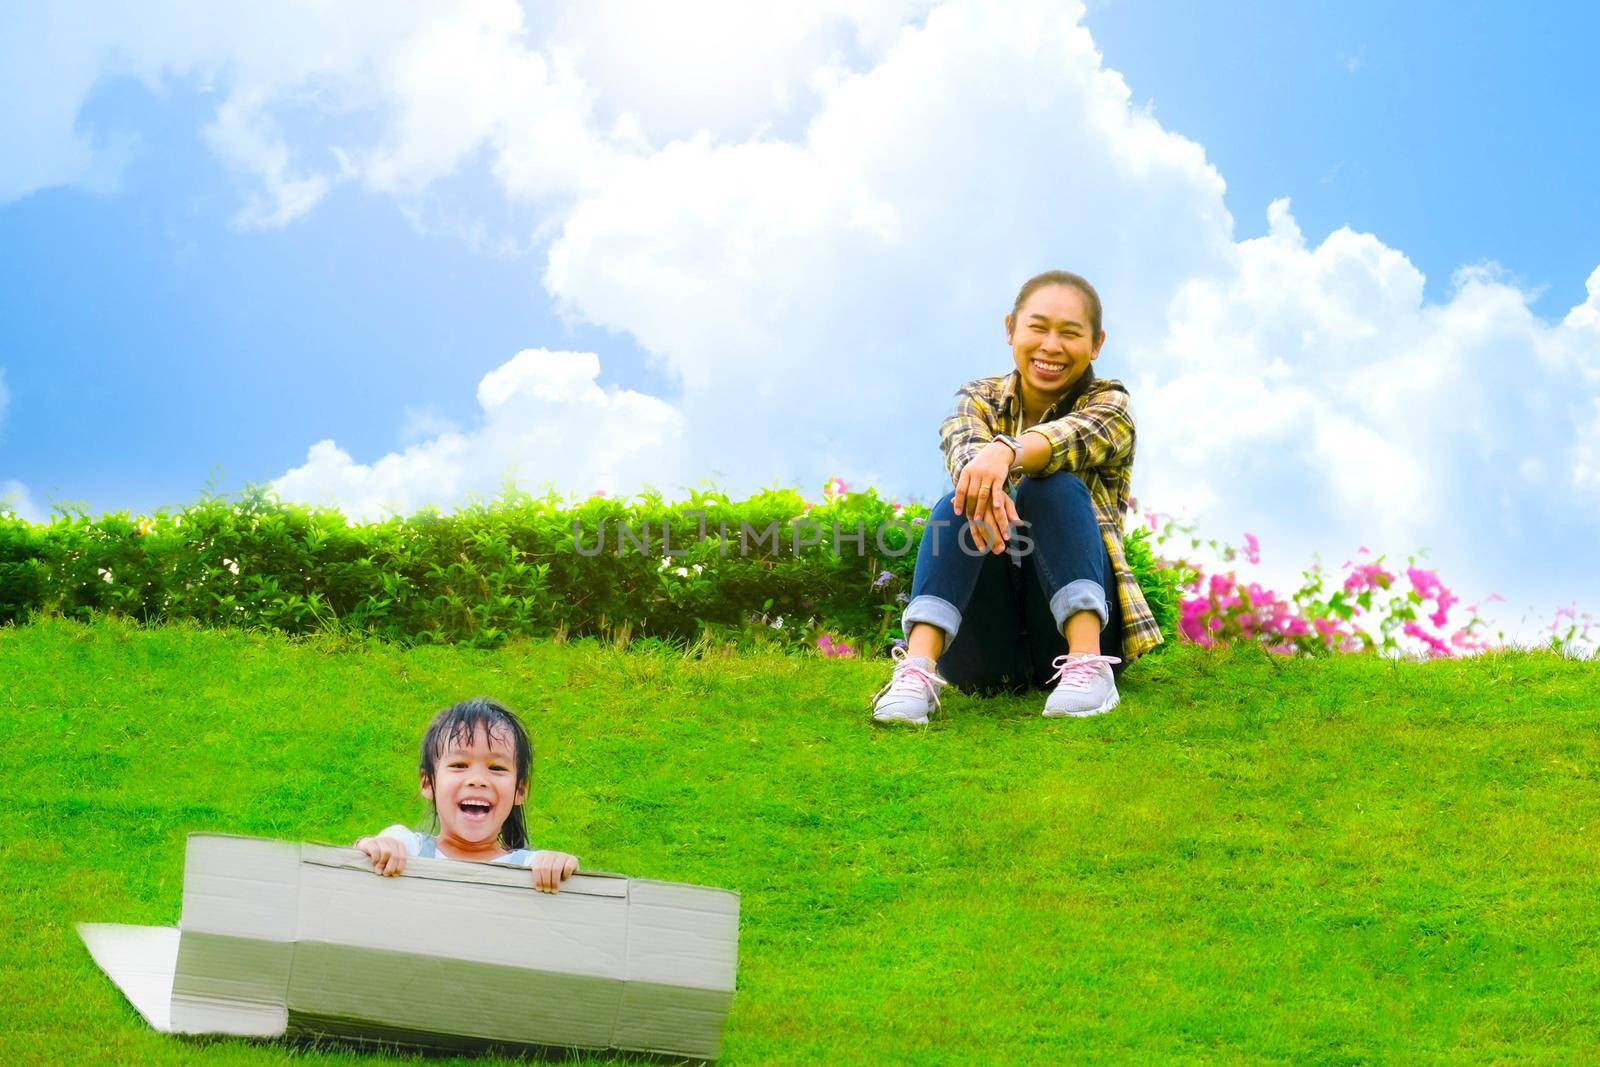 Smiling little girl sat on a cardboard box sliding down a hill at the Botanical Garden and her mother smiled as she looked at her. Happy childhood concept. by TEERASAK